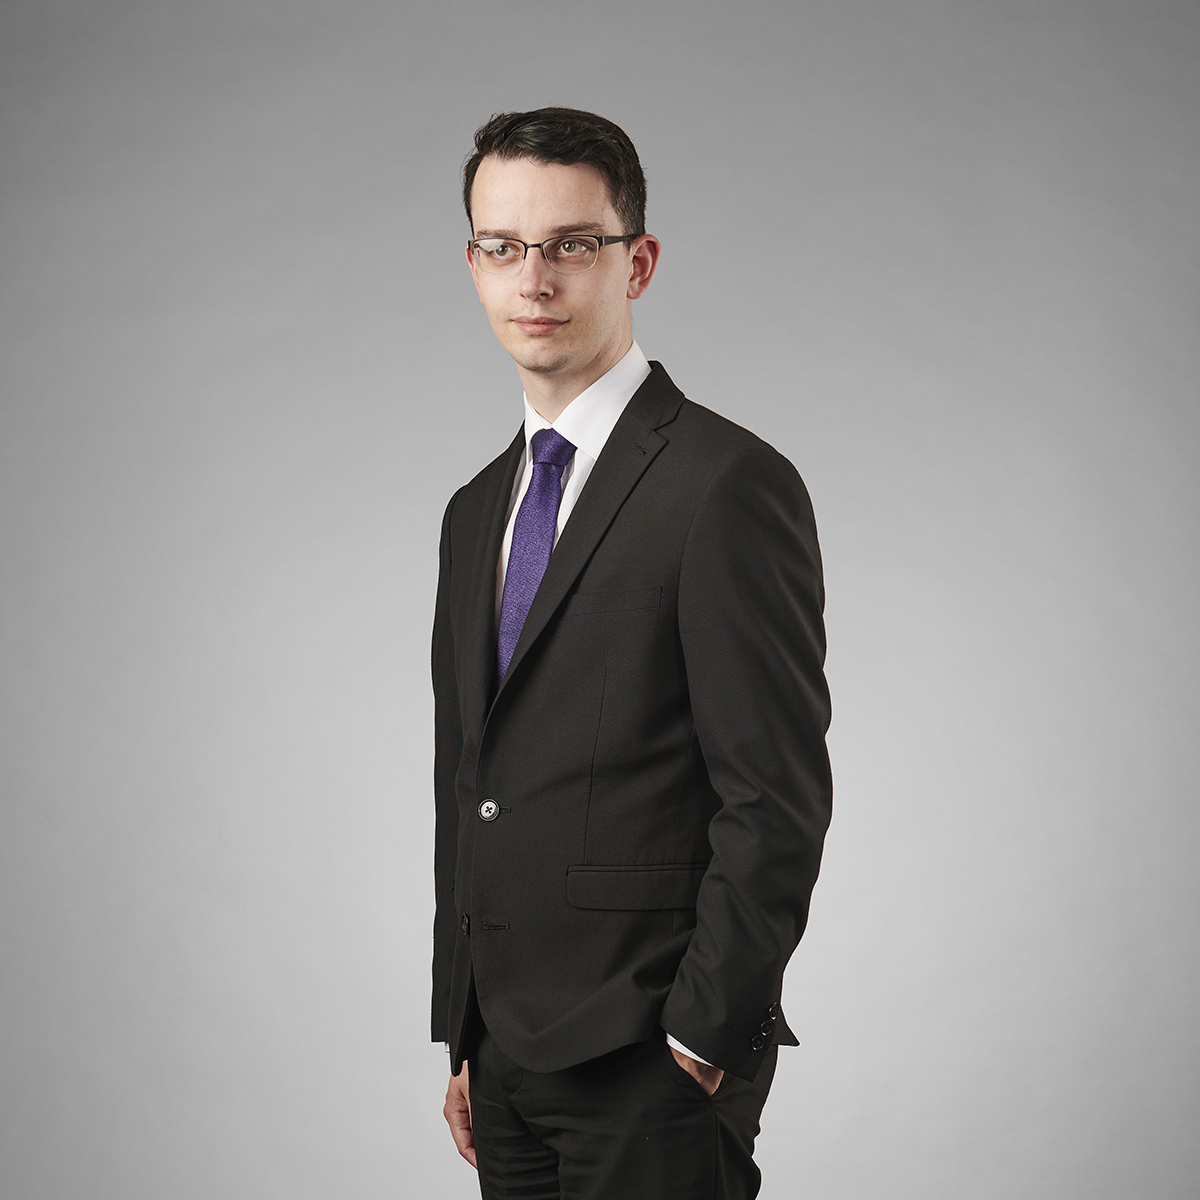 Euan Thompson, Trainee Solicitor